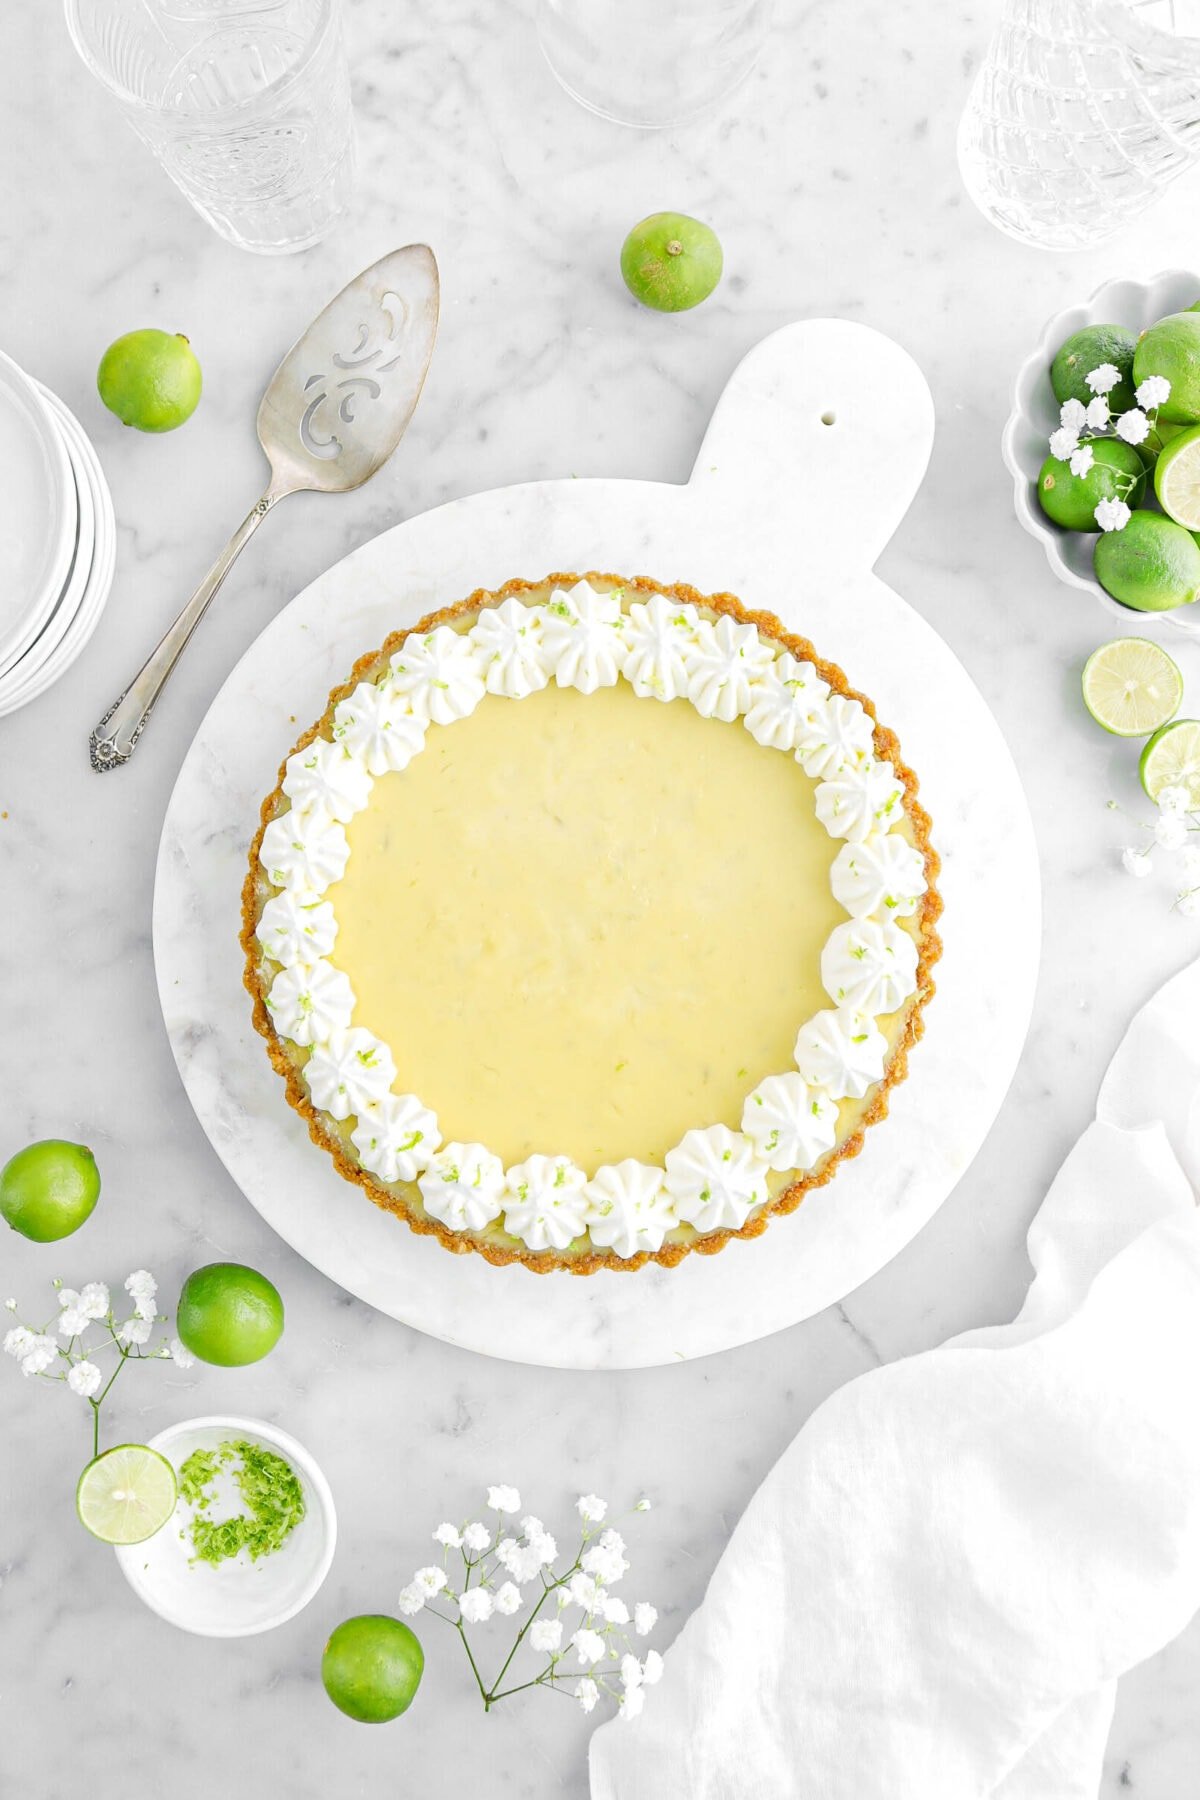 pie on marble serving tray with key limed snd white flowers around on marble surface.